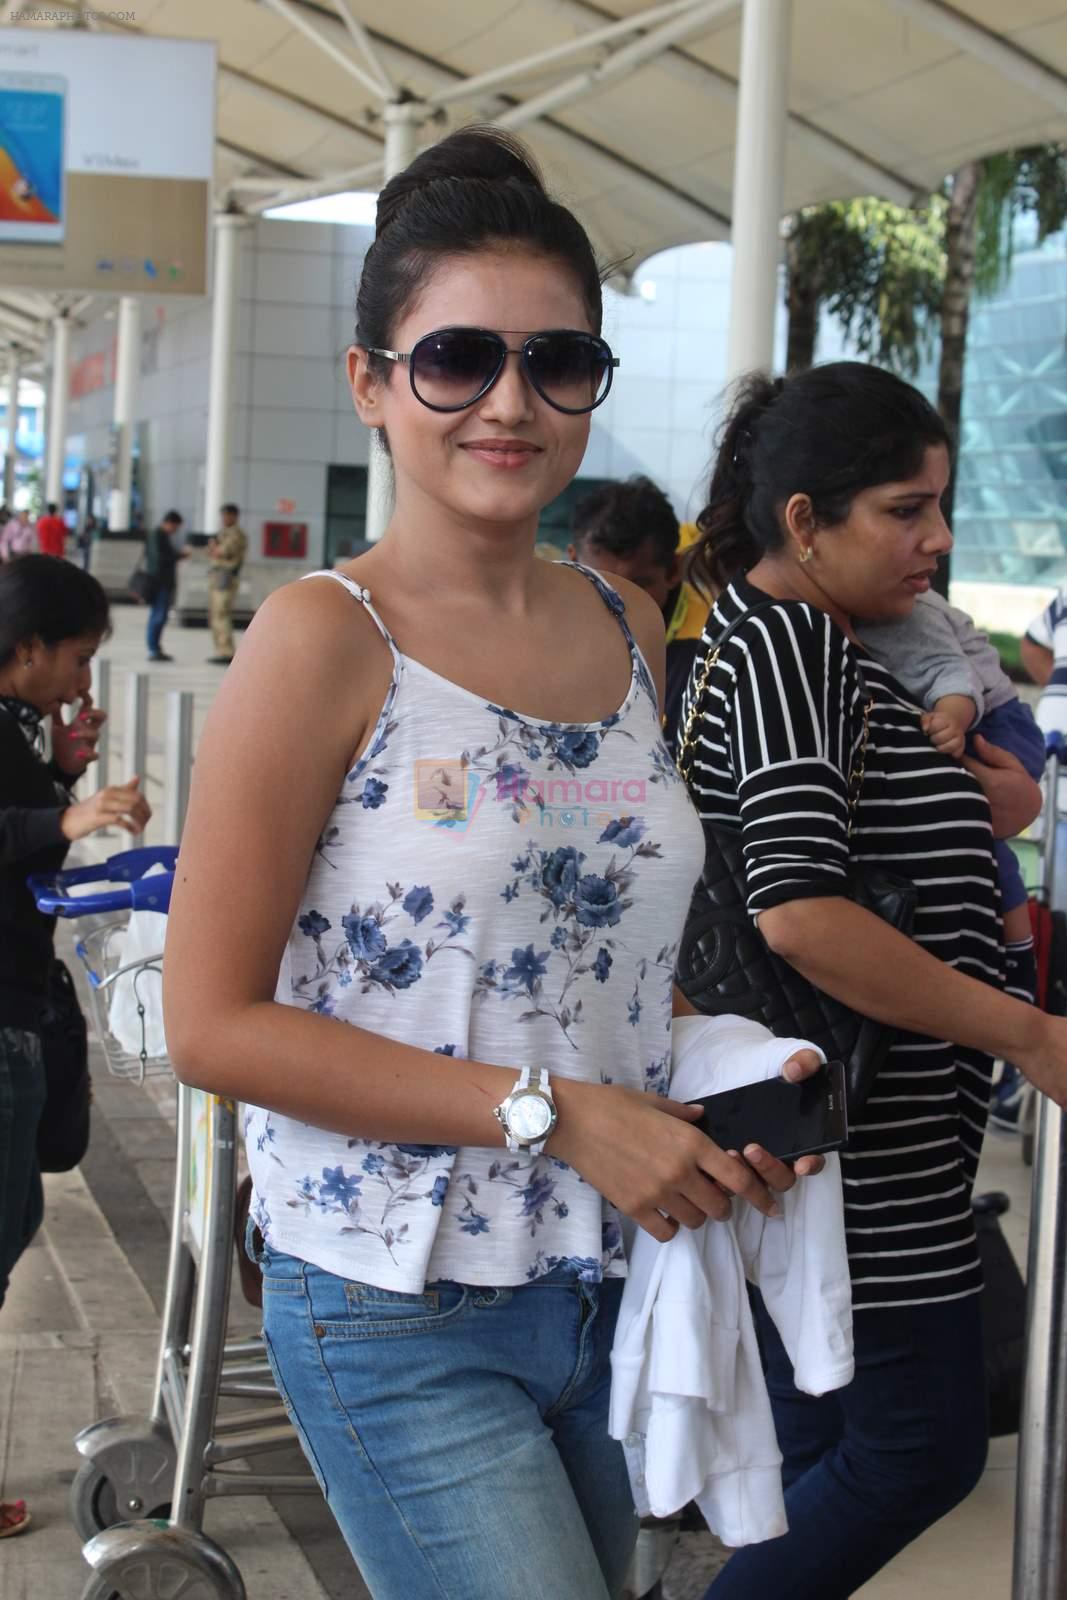 snapped at the airport on 31st July 2015